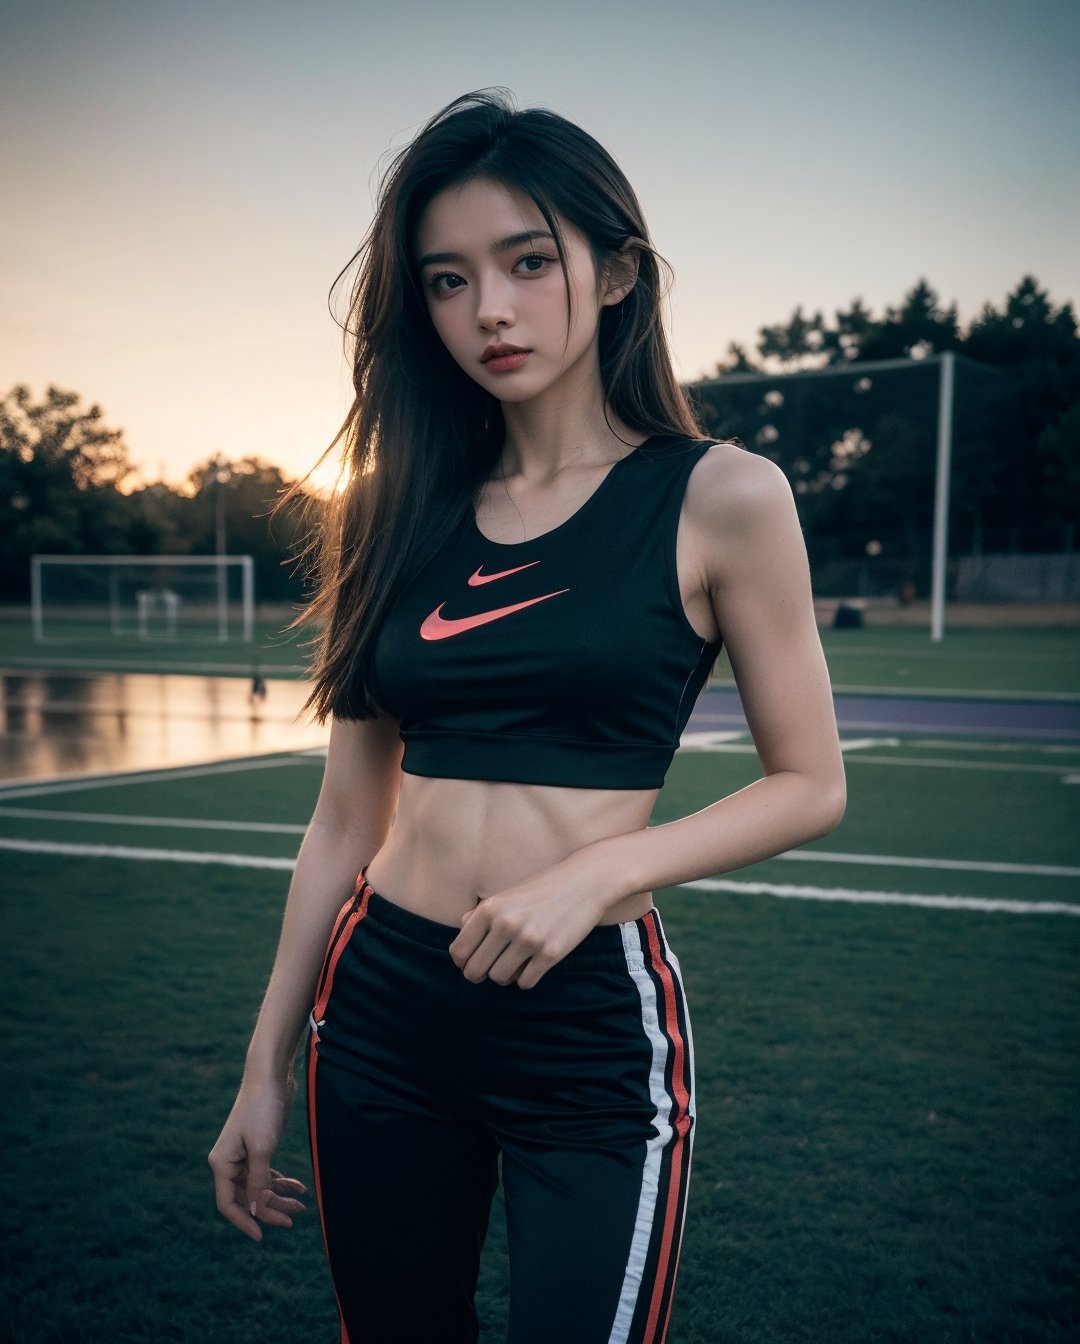 (RAW photo, best quality), (realistic, photo-Realistic), best quality, masterpiece, beautiful and aesthetic, 16K, (HDR), high contrast, (vibrant color),

ous hair,

1/2 head shot, looking at the viewer, standing in a soccer field at night, wearing a tight nike gym outfit